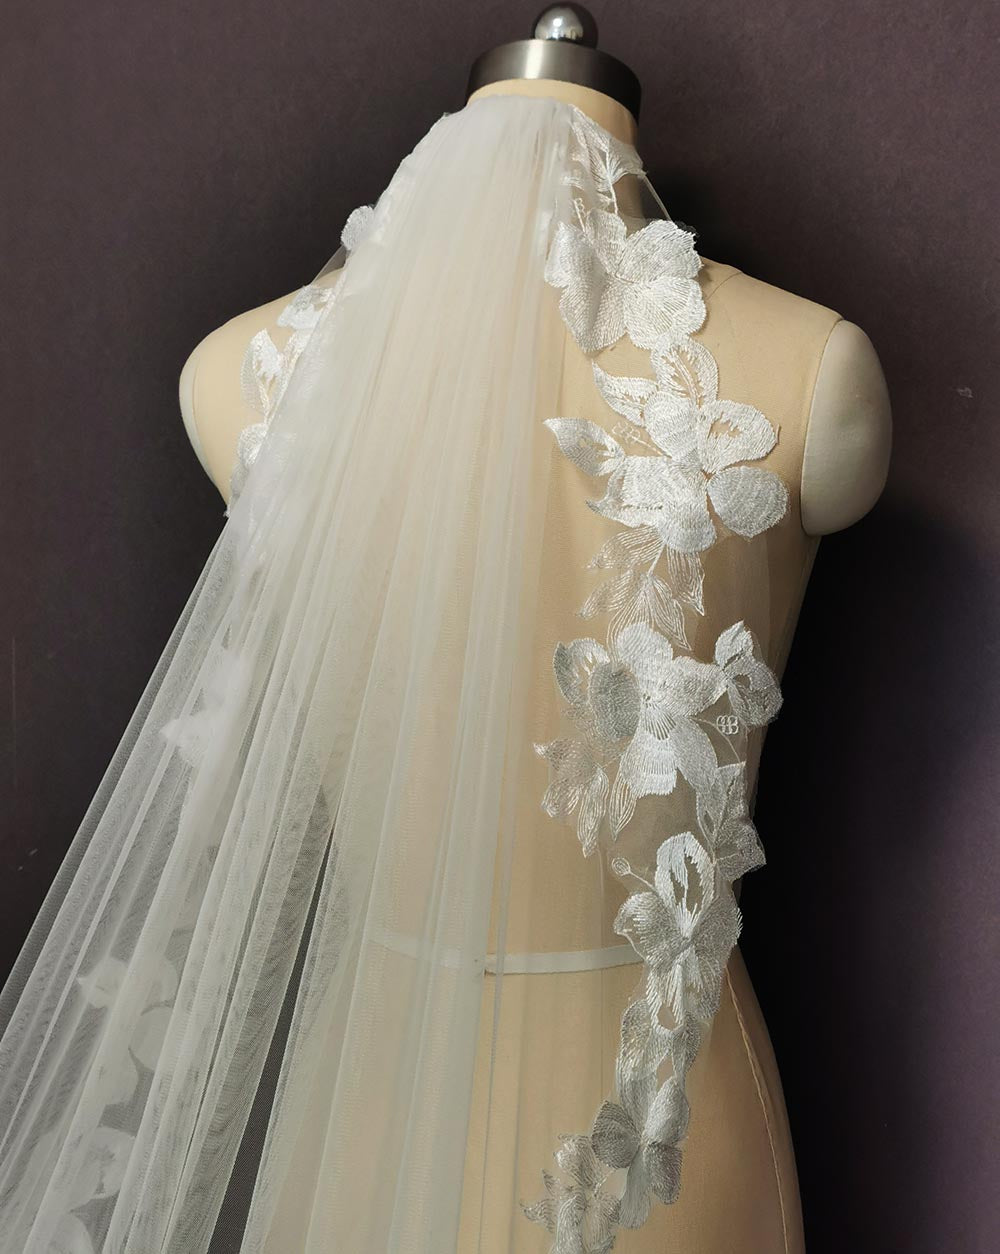 Load image into Gallery viewer, Tulle Flower Lace Cathedral Wedding Veil 3 Meters 1 Layer Bridal Veil
